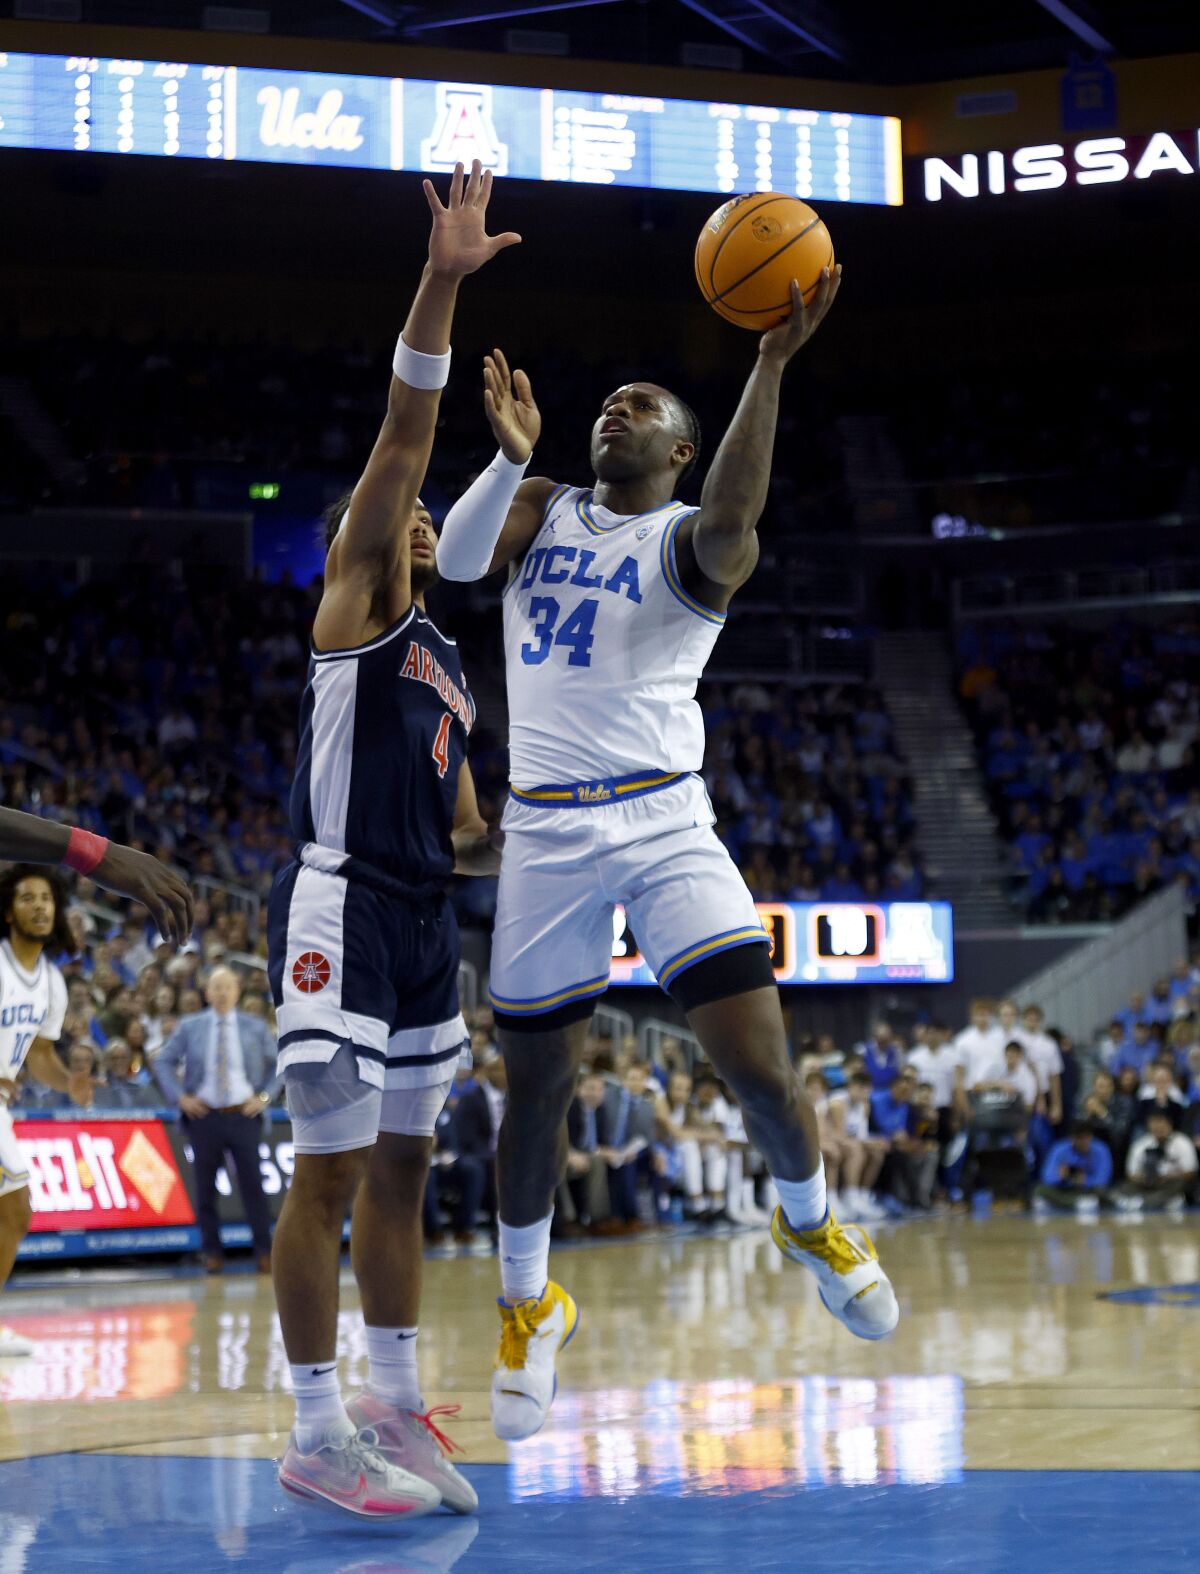 The Bruins' David Singleton stepped up a shot against the Wildcats' Kylan Boswell.